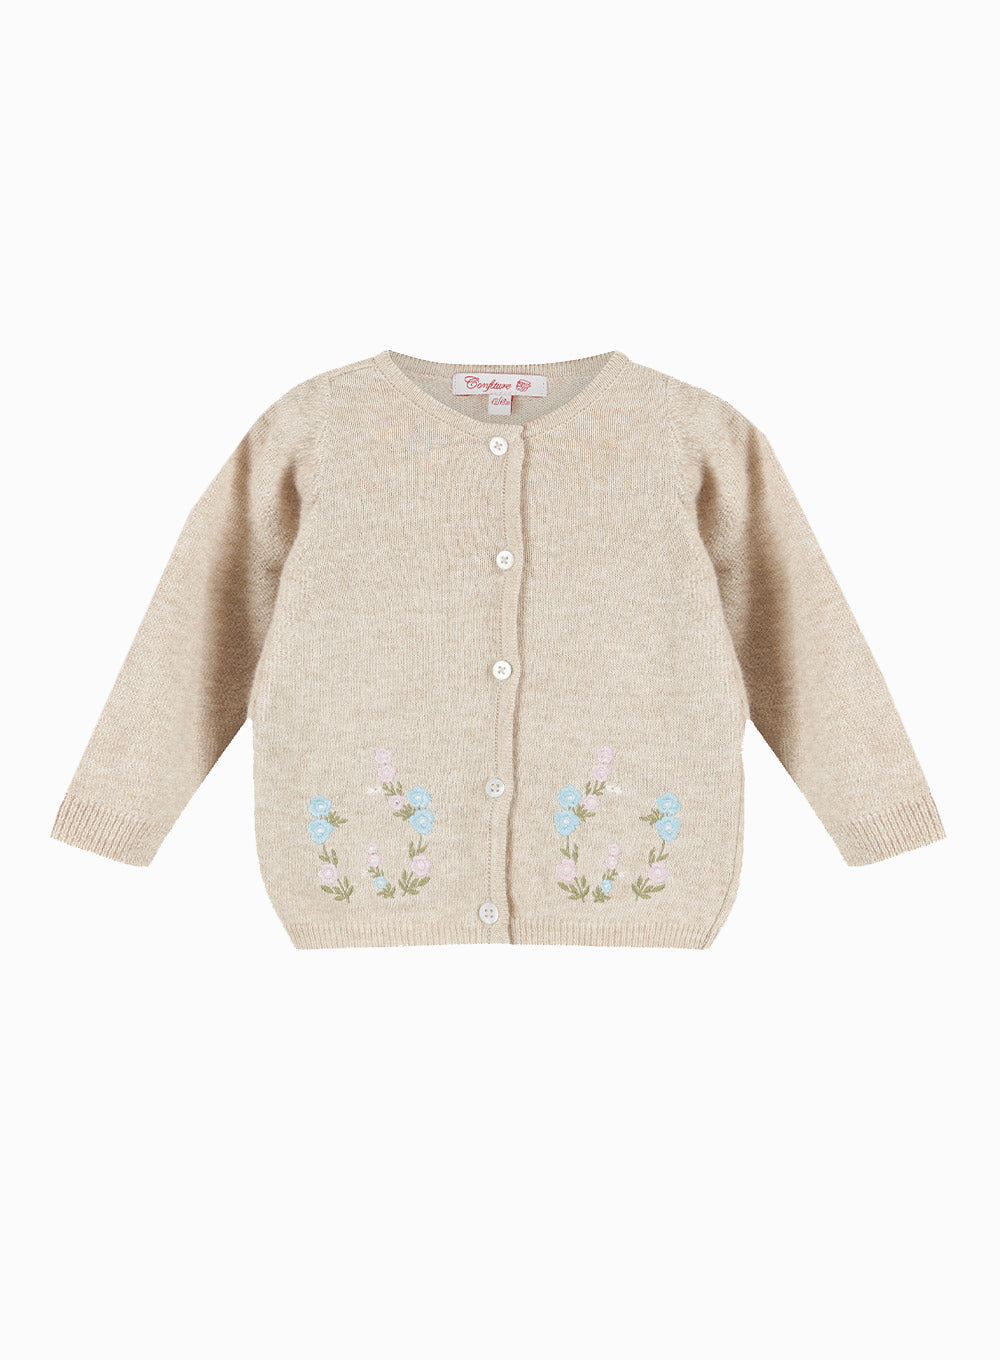 Little Emily Embroidered Cardigan in Oatmeal